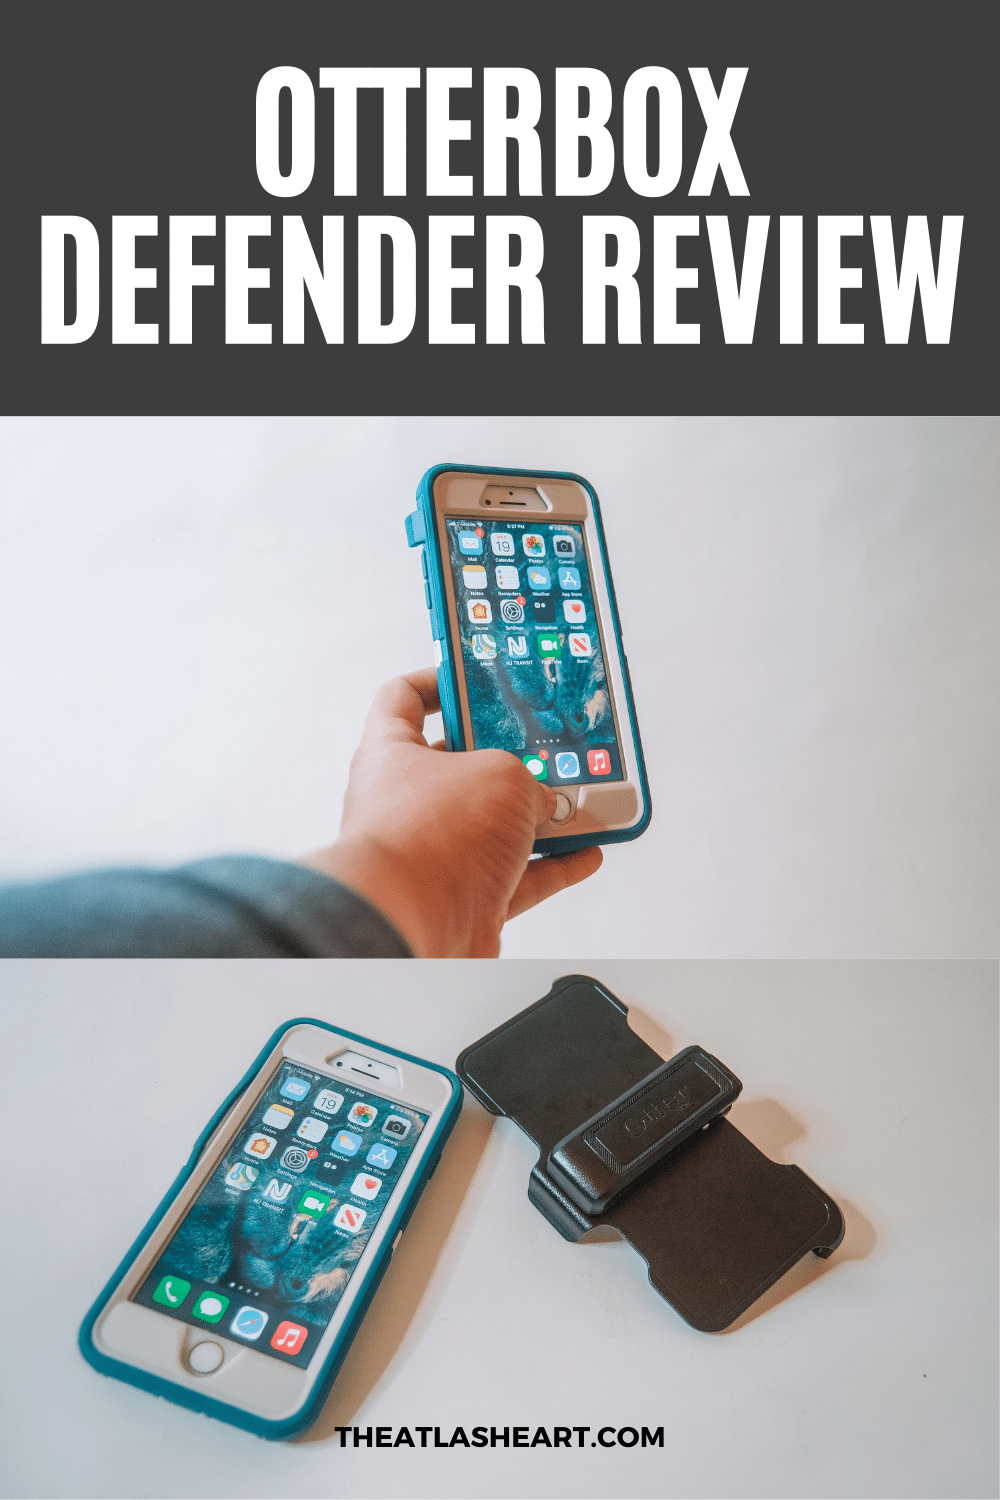 Otterbox Defender Review for 2022: An Honest Look at the Defender Case